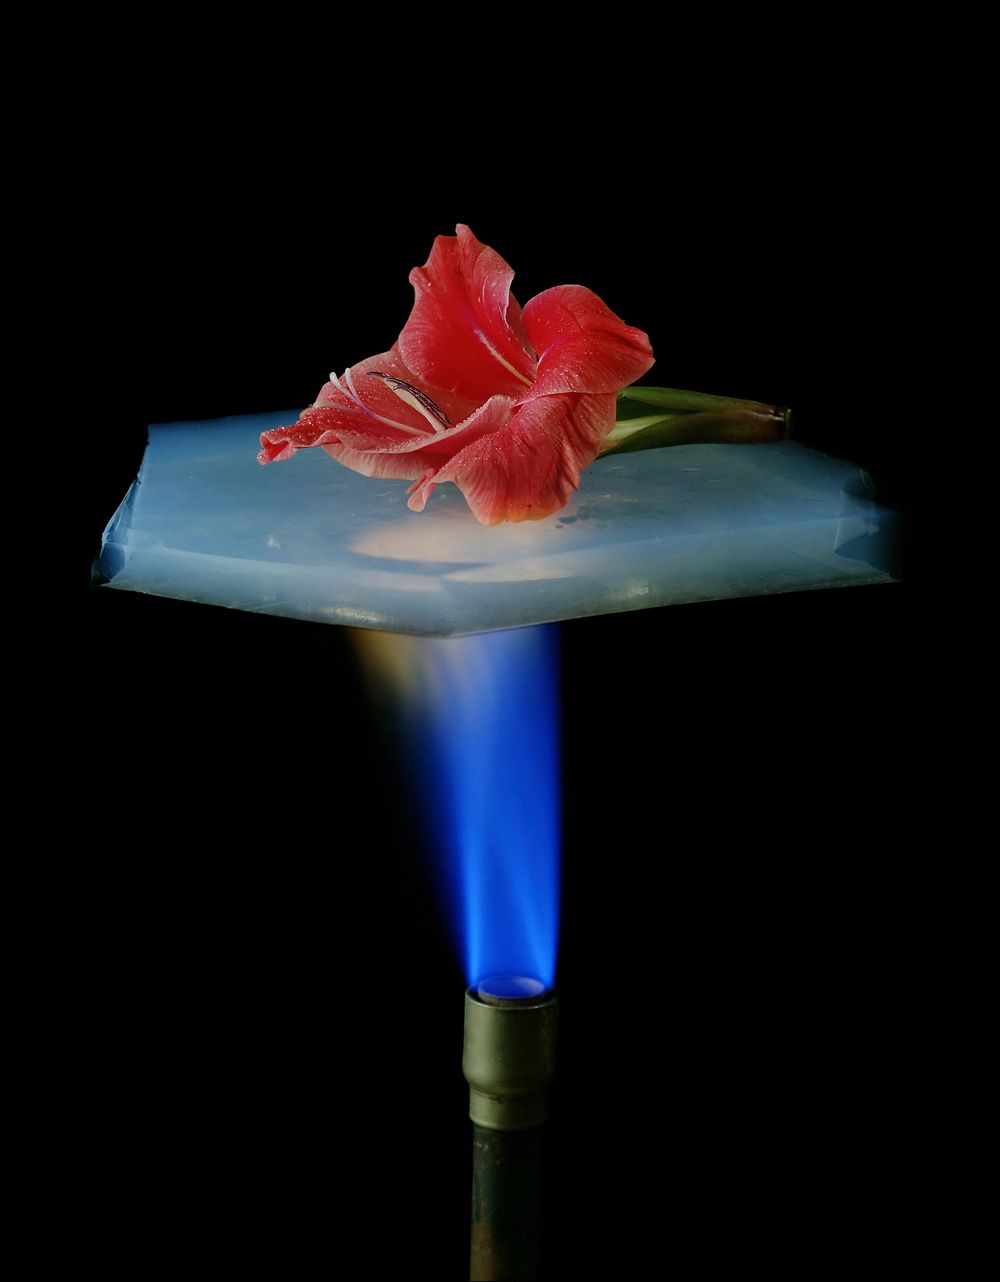 A flower is on a piece of aerogel which is suspended over a Bunsen burner. Aerogel has excellent insulating properties, and…